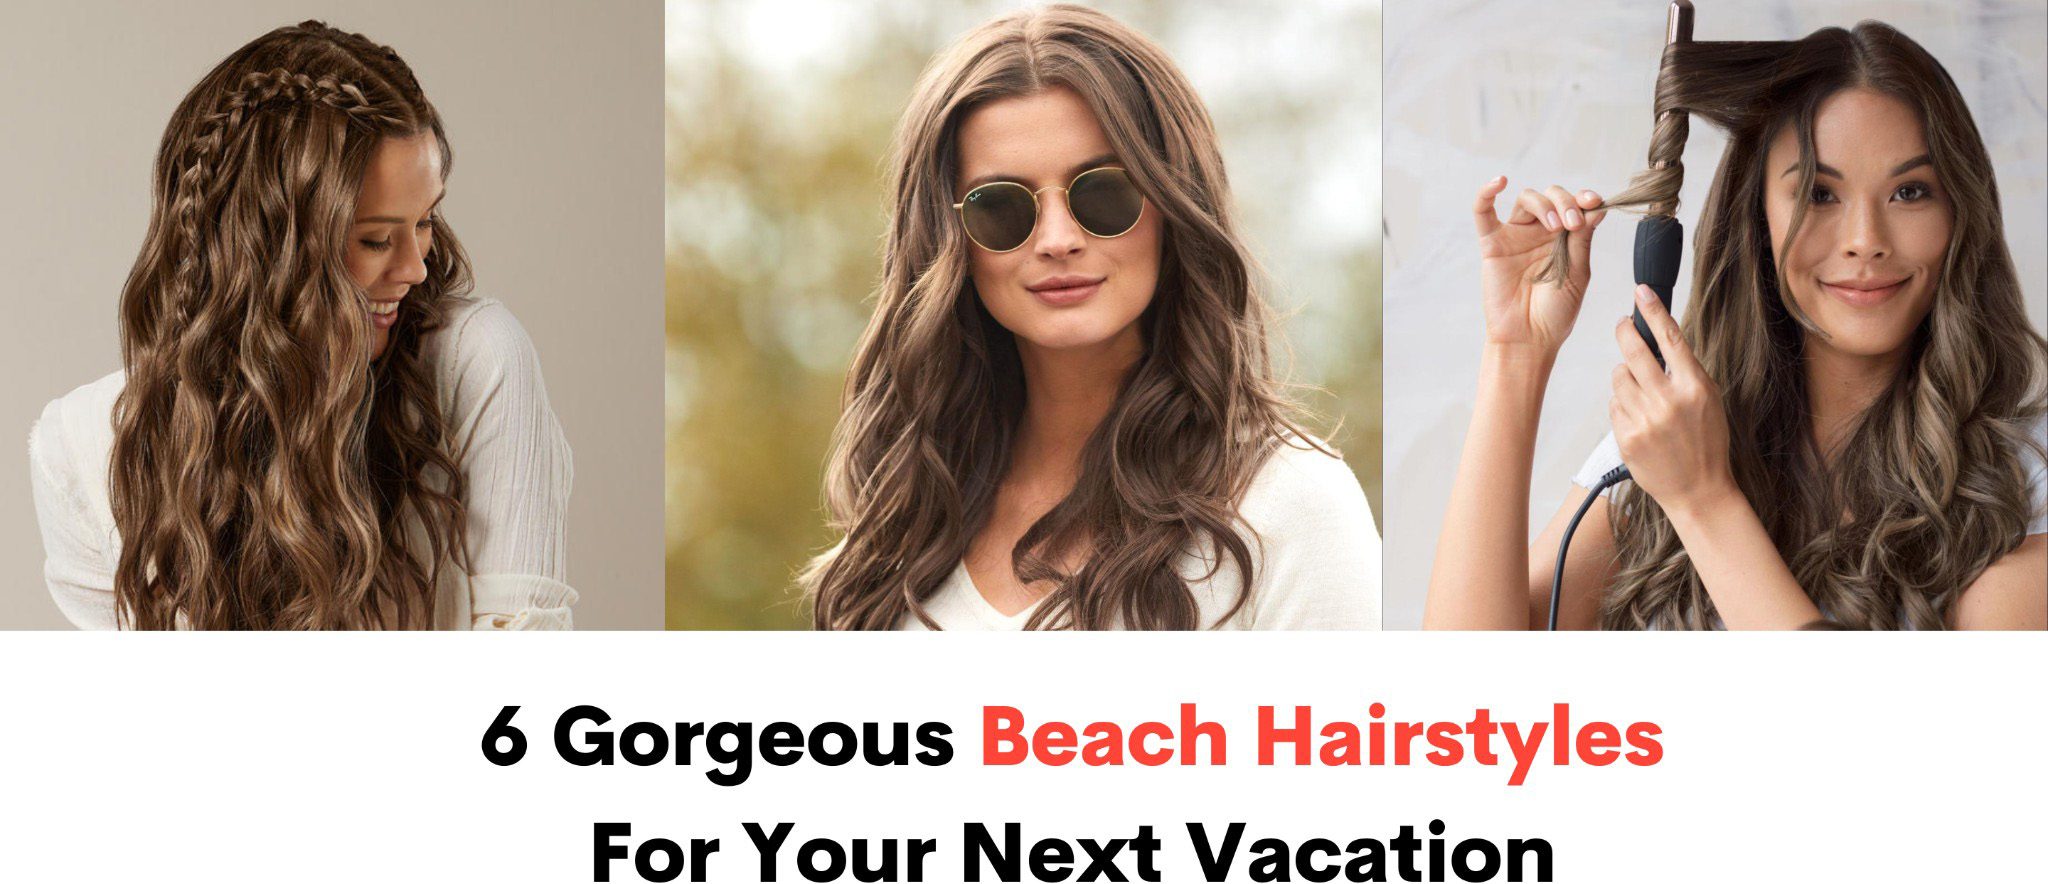 6 Gorgeous Beach Hairstyles For Your Next Vacation